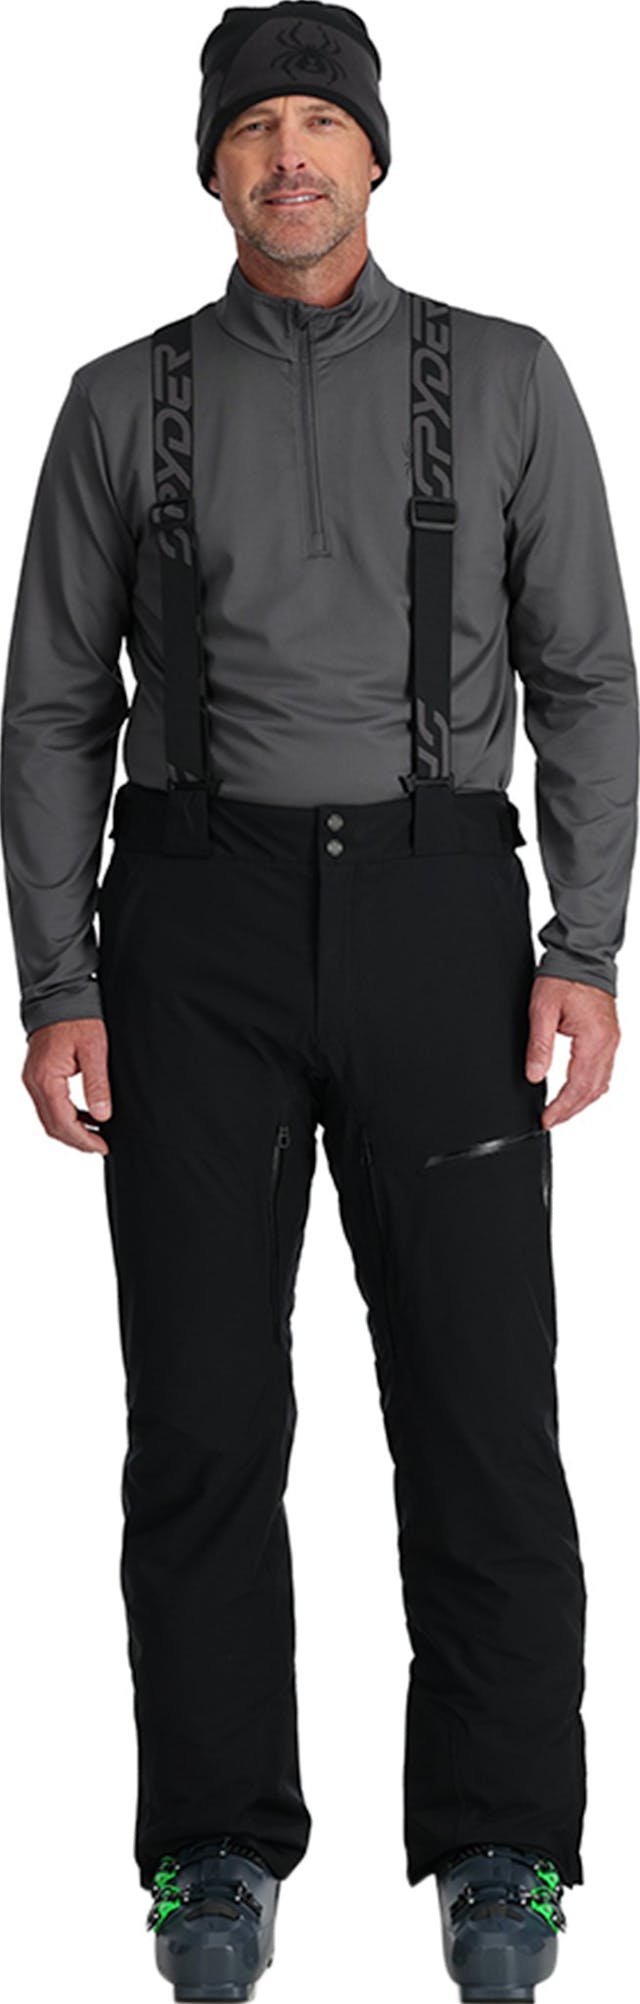 Product image for Dare Pants - Men's